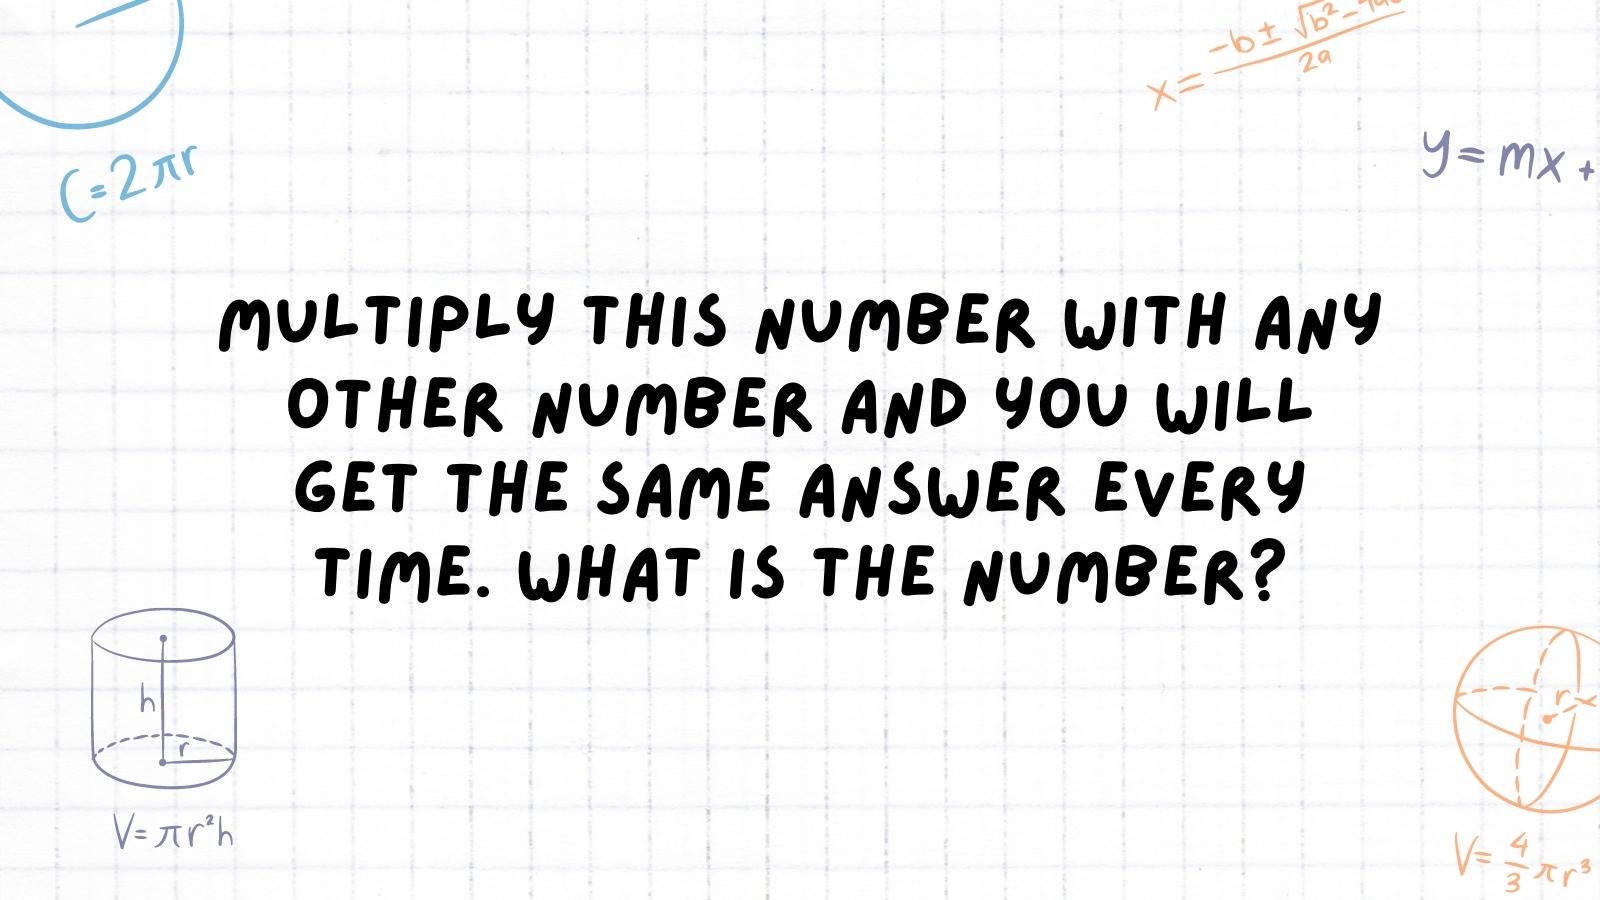 Multiply this number with any other number and you will get the same answer every time. What is the number?